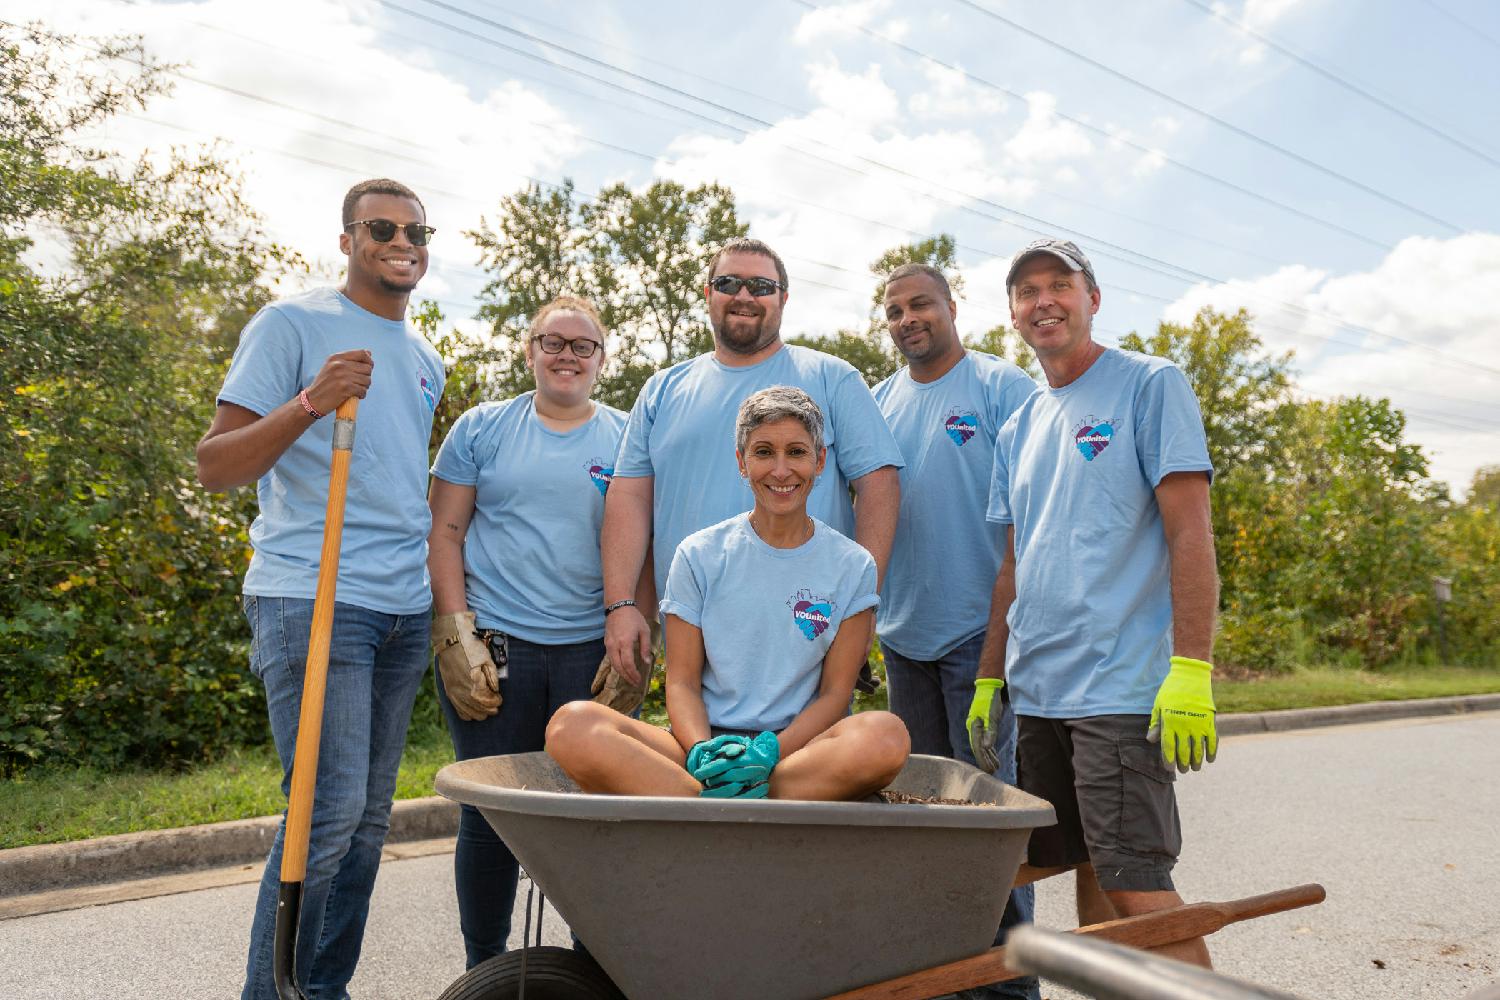 Service to the communities where we live and work is a cornerstone of the culture at Reynolds American.